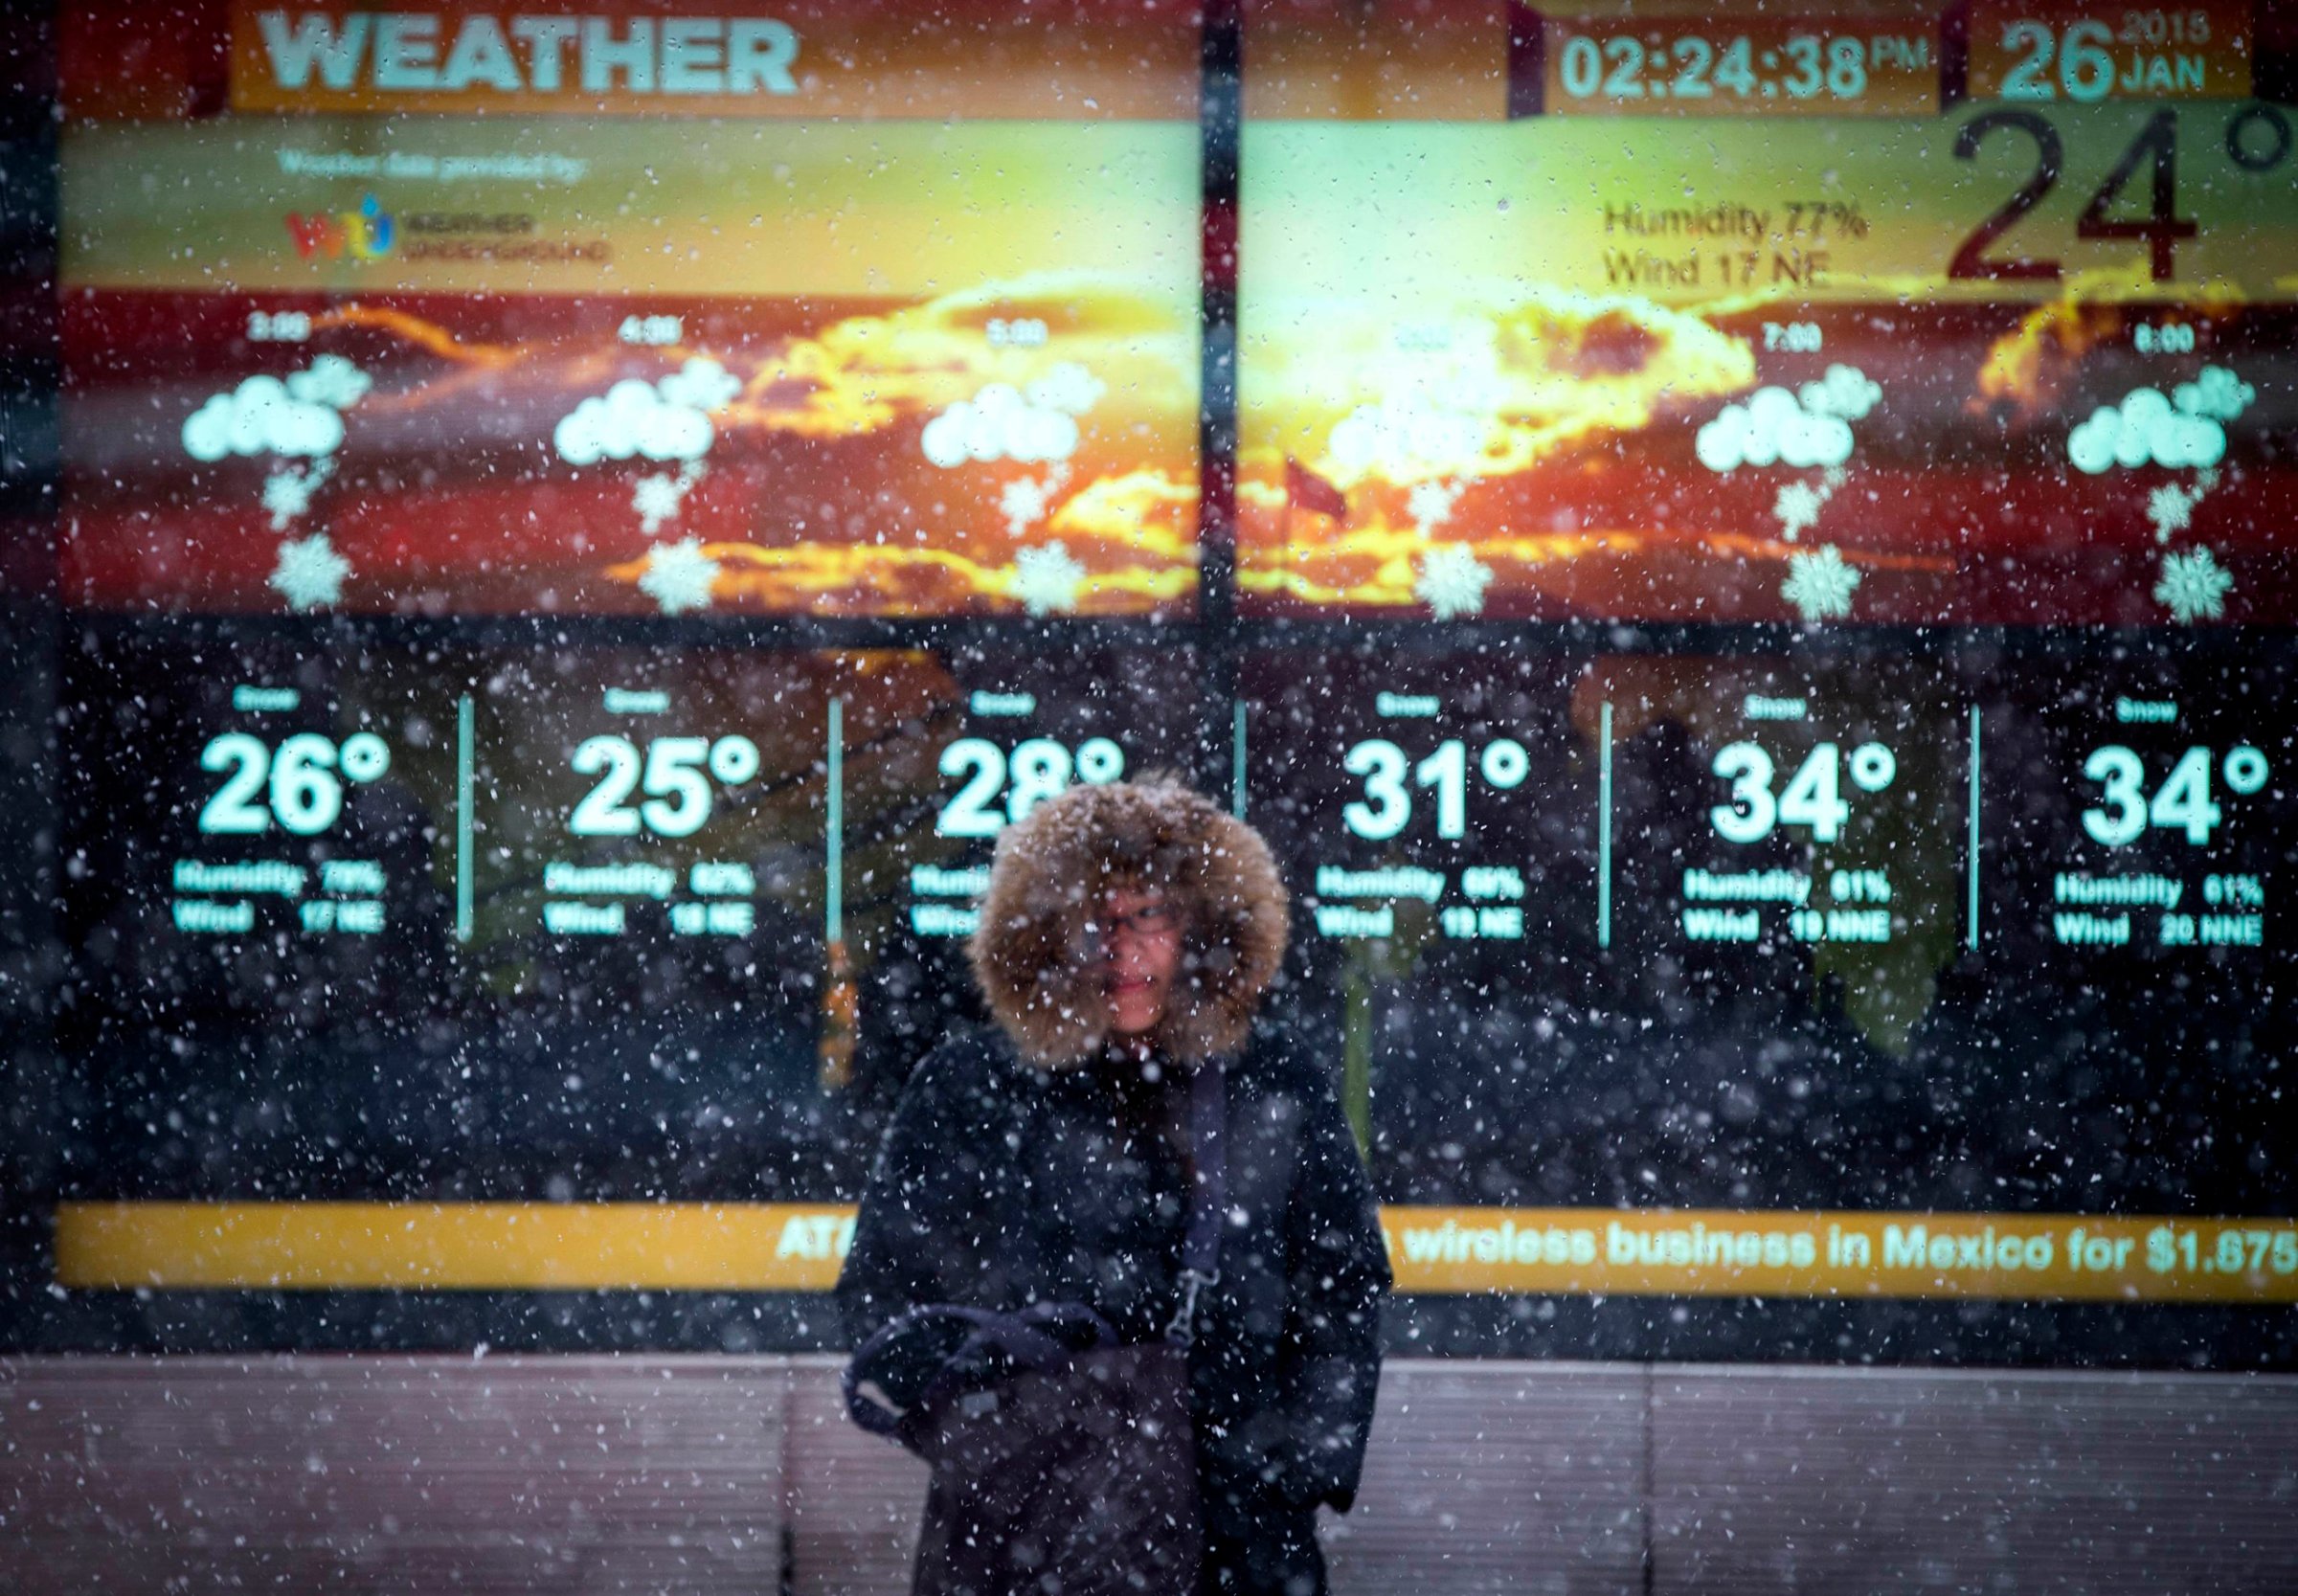 A woman stands in falling snow in front of an electronic sign displaying the weather forecast in Times Square in New York